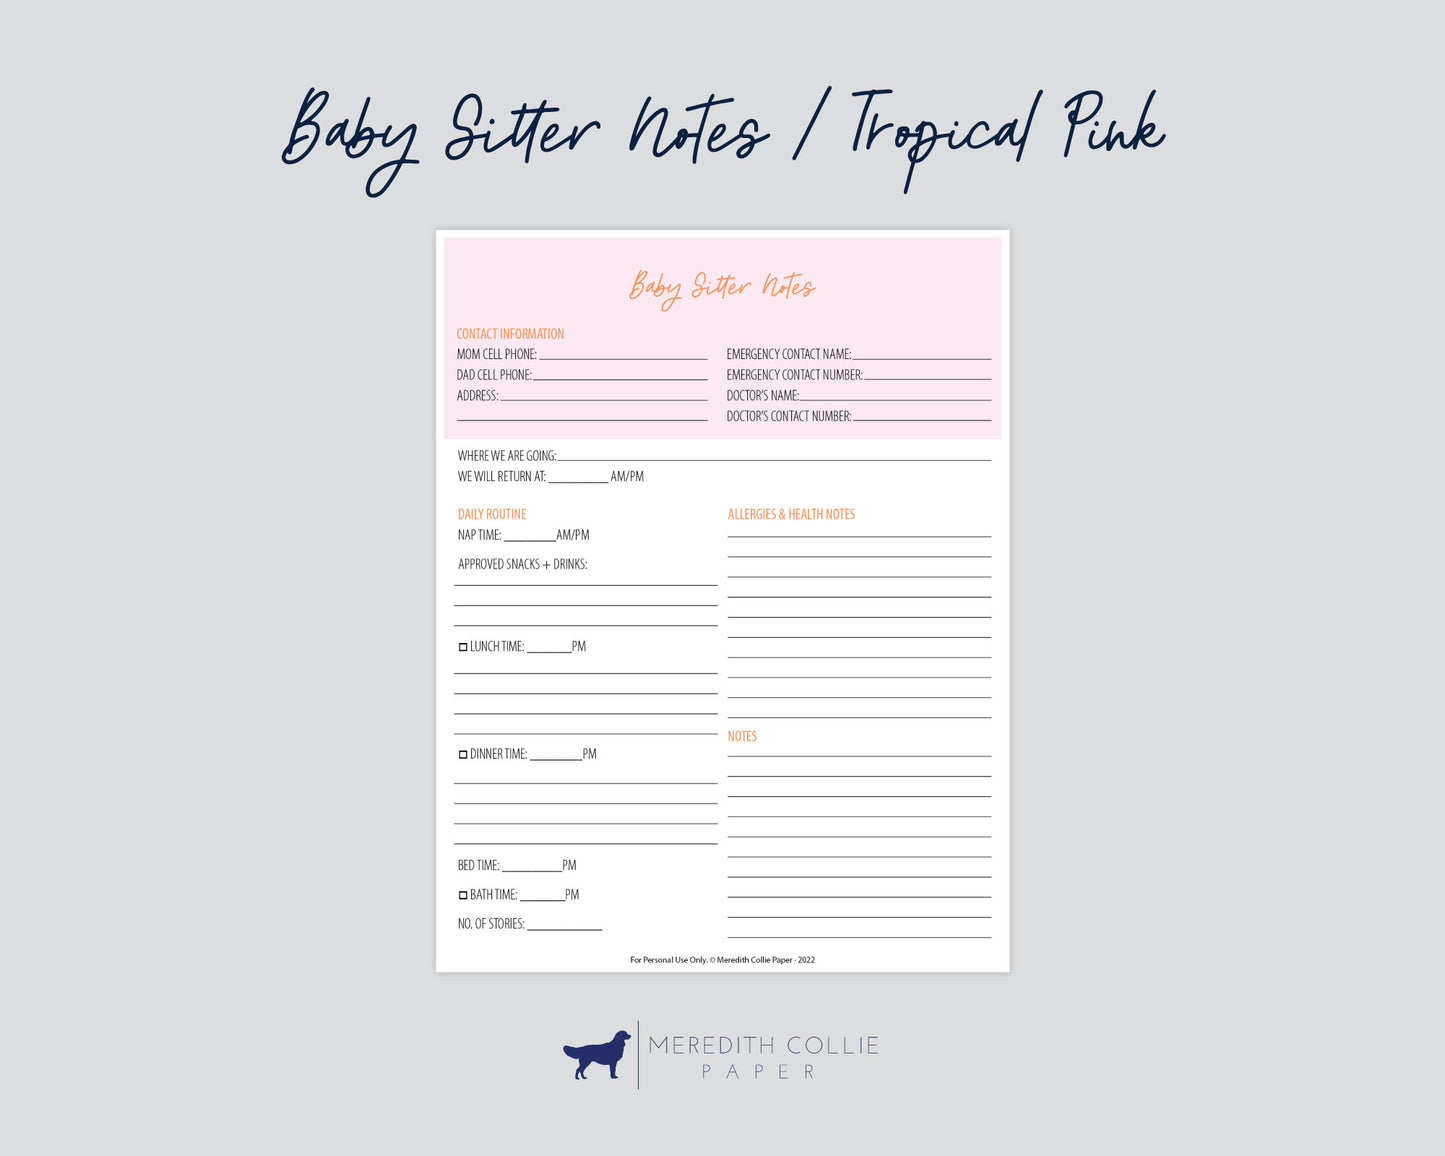 baby sitter notes, tropical pink, digital download, Meredith Collie paper